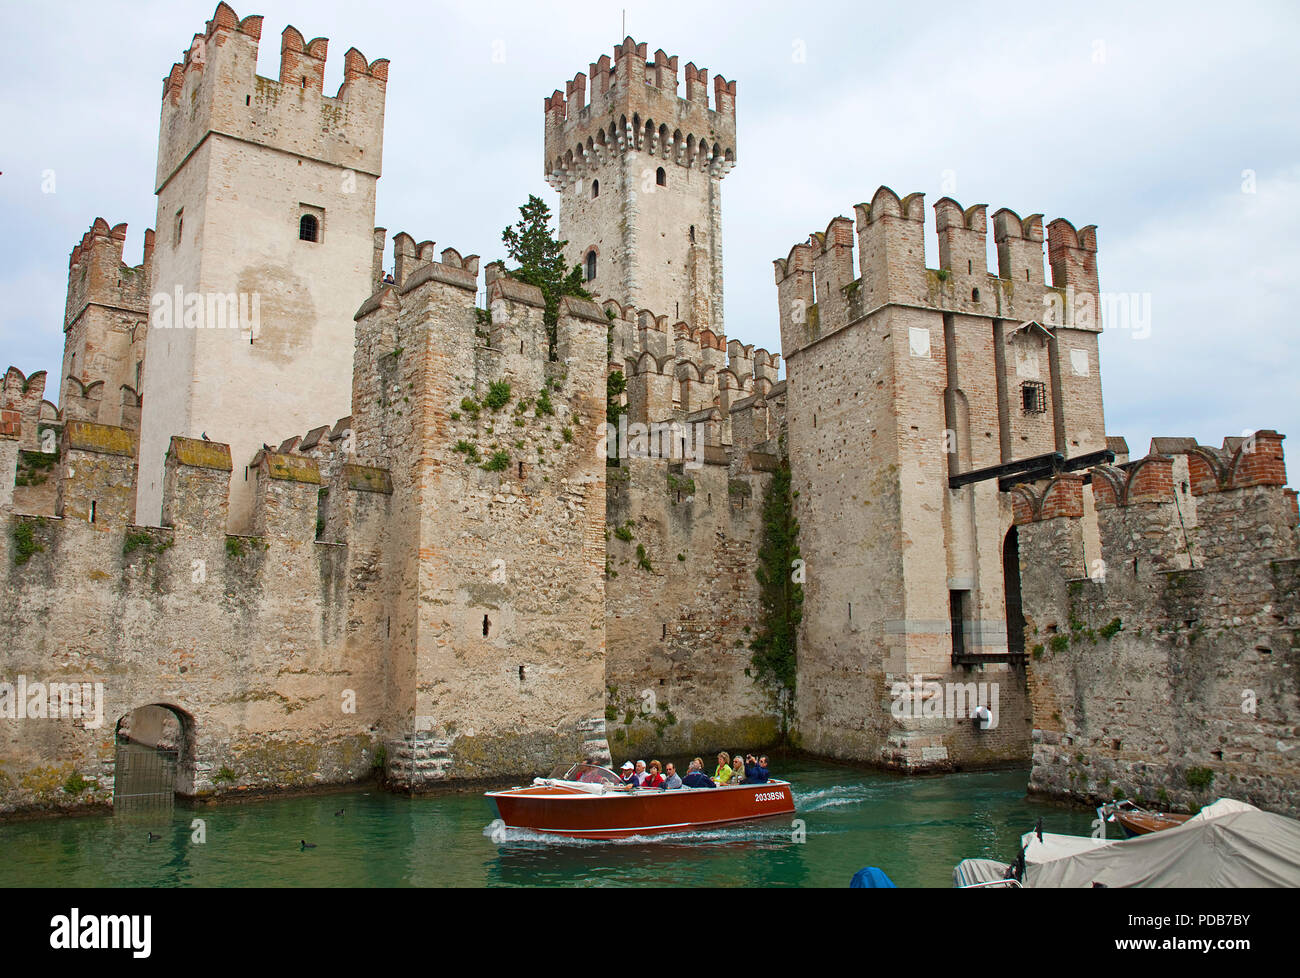 Roundtrip-boat at the Scaliger castle, landmark of Sirmione, Lake Garda, Lombardy, Italy Stock Photo